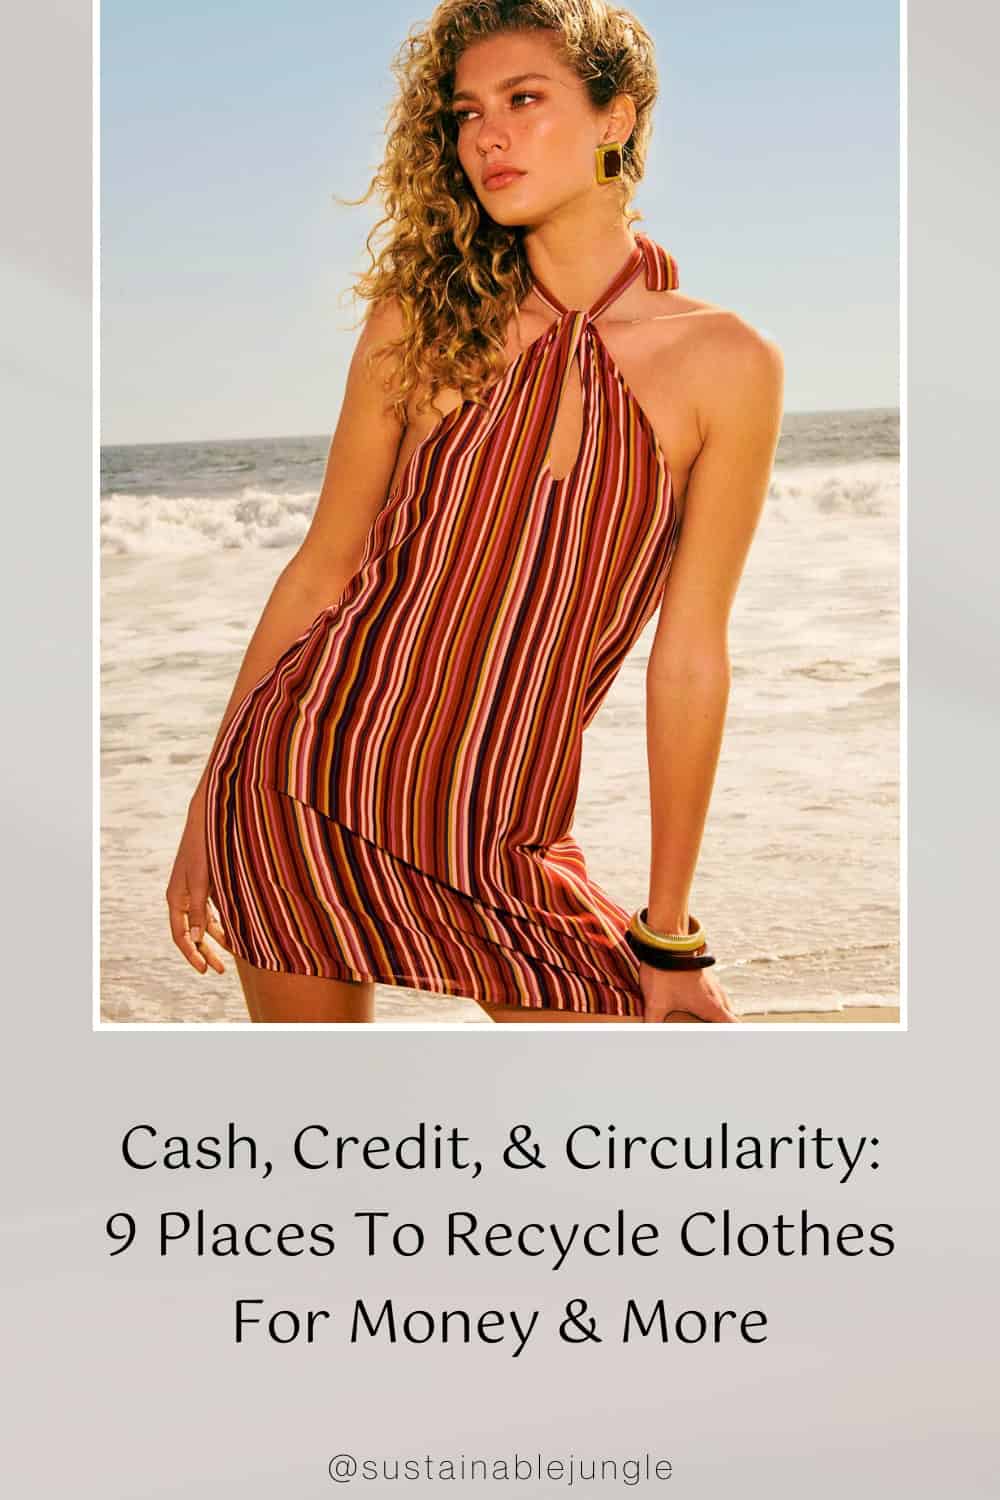 Cash, Credit, & Circularity: 9 Places To Recycle Clothes For Money & More Image by Reformation #recycleclothesformoney #recycleclothesforcash #clothingrecyclingprograms #recyclefashion #clothingtakebackprograms #howtorecycleclothesformoney #sustainablejungle